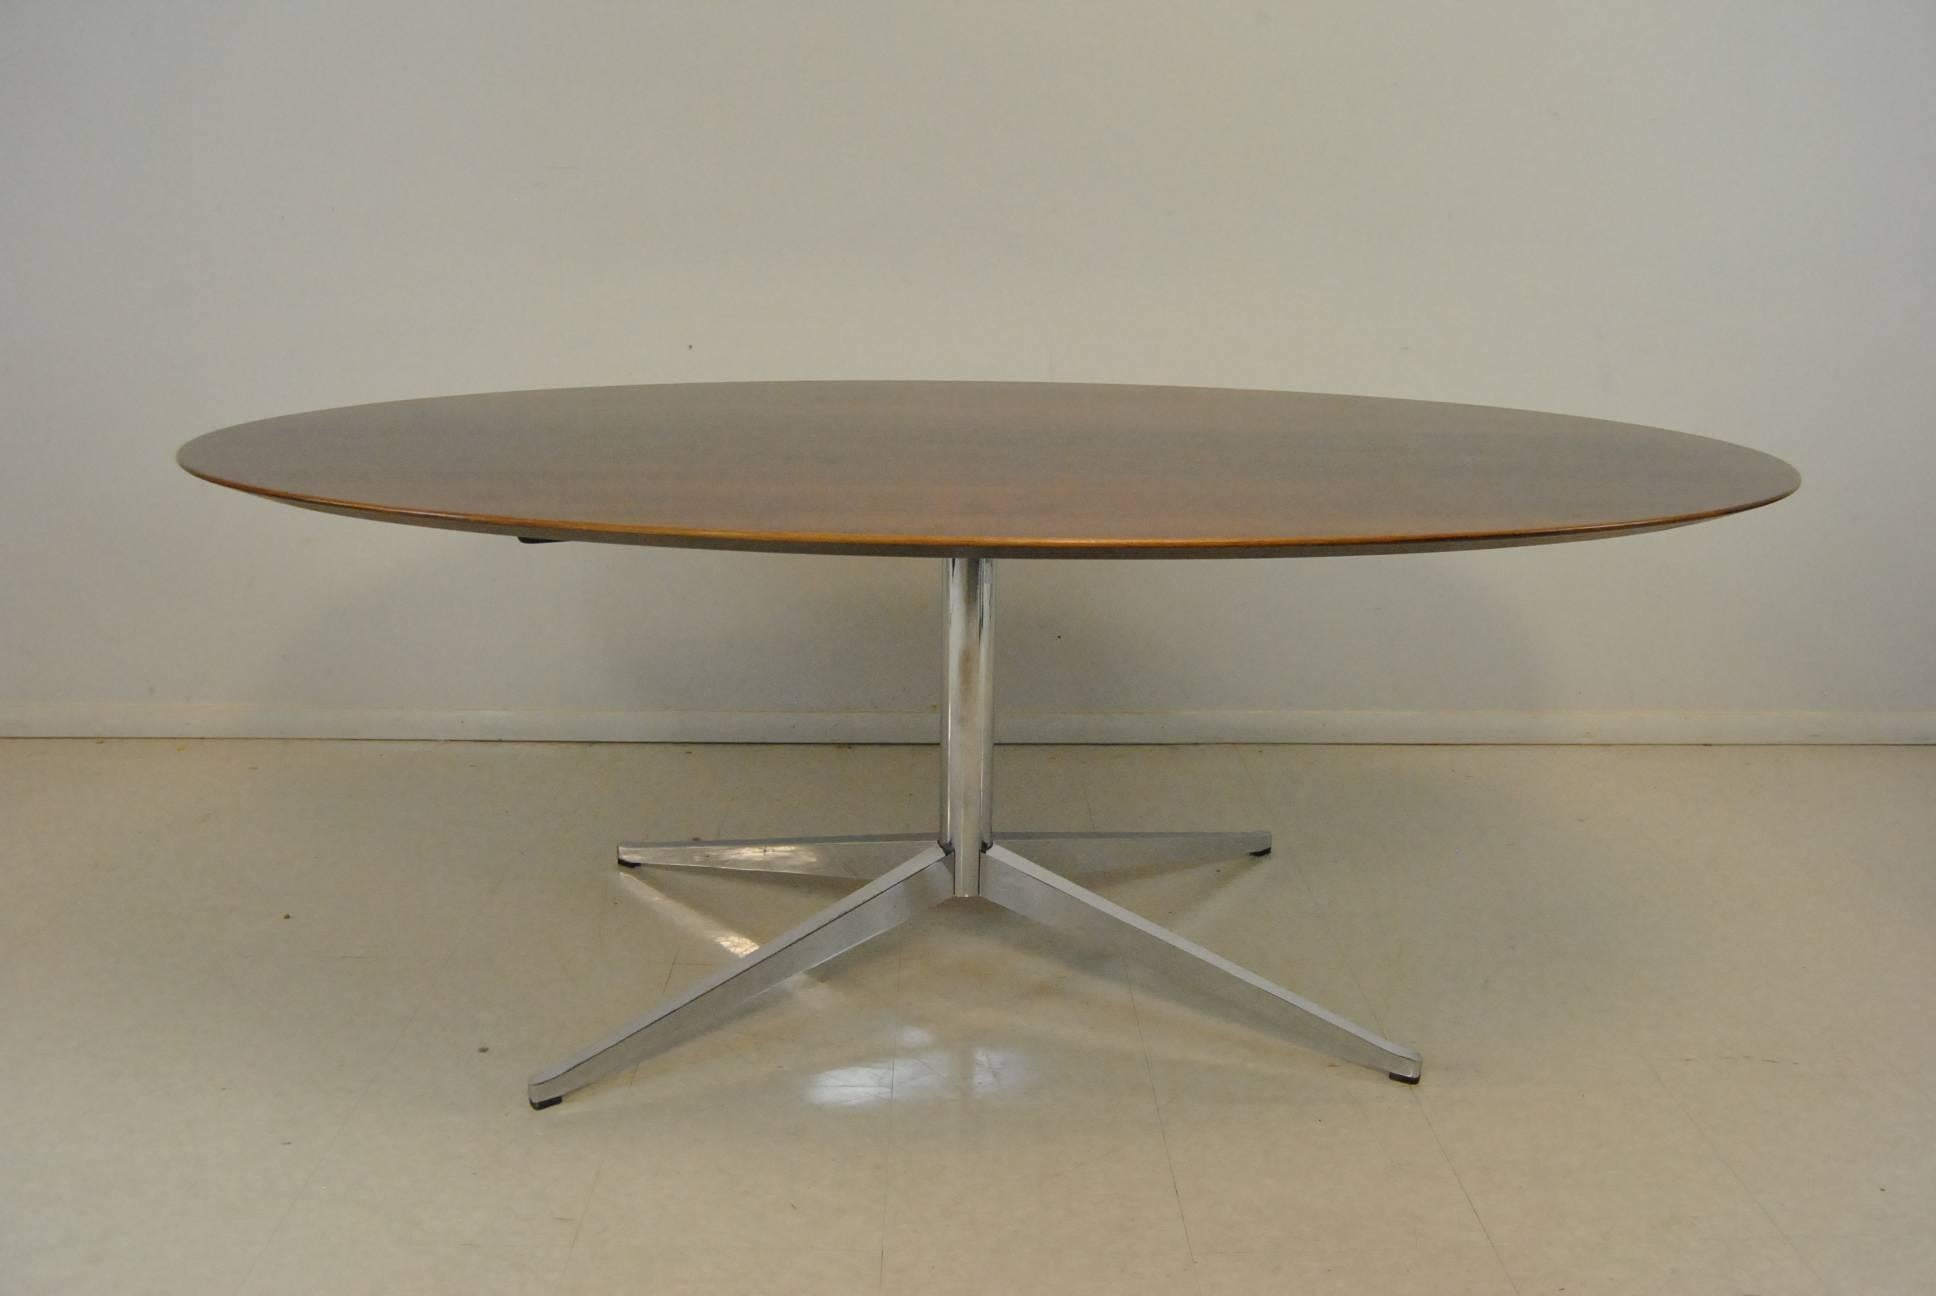 A fantastic conference or dining room table by Florence Knoll. This beautiful table features an oval Rosewood top with a bevelled edge and exceptional graining. It is supported by polished chromed four-star legs. The dimensions are 78